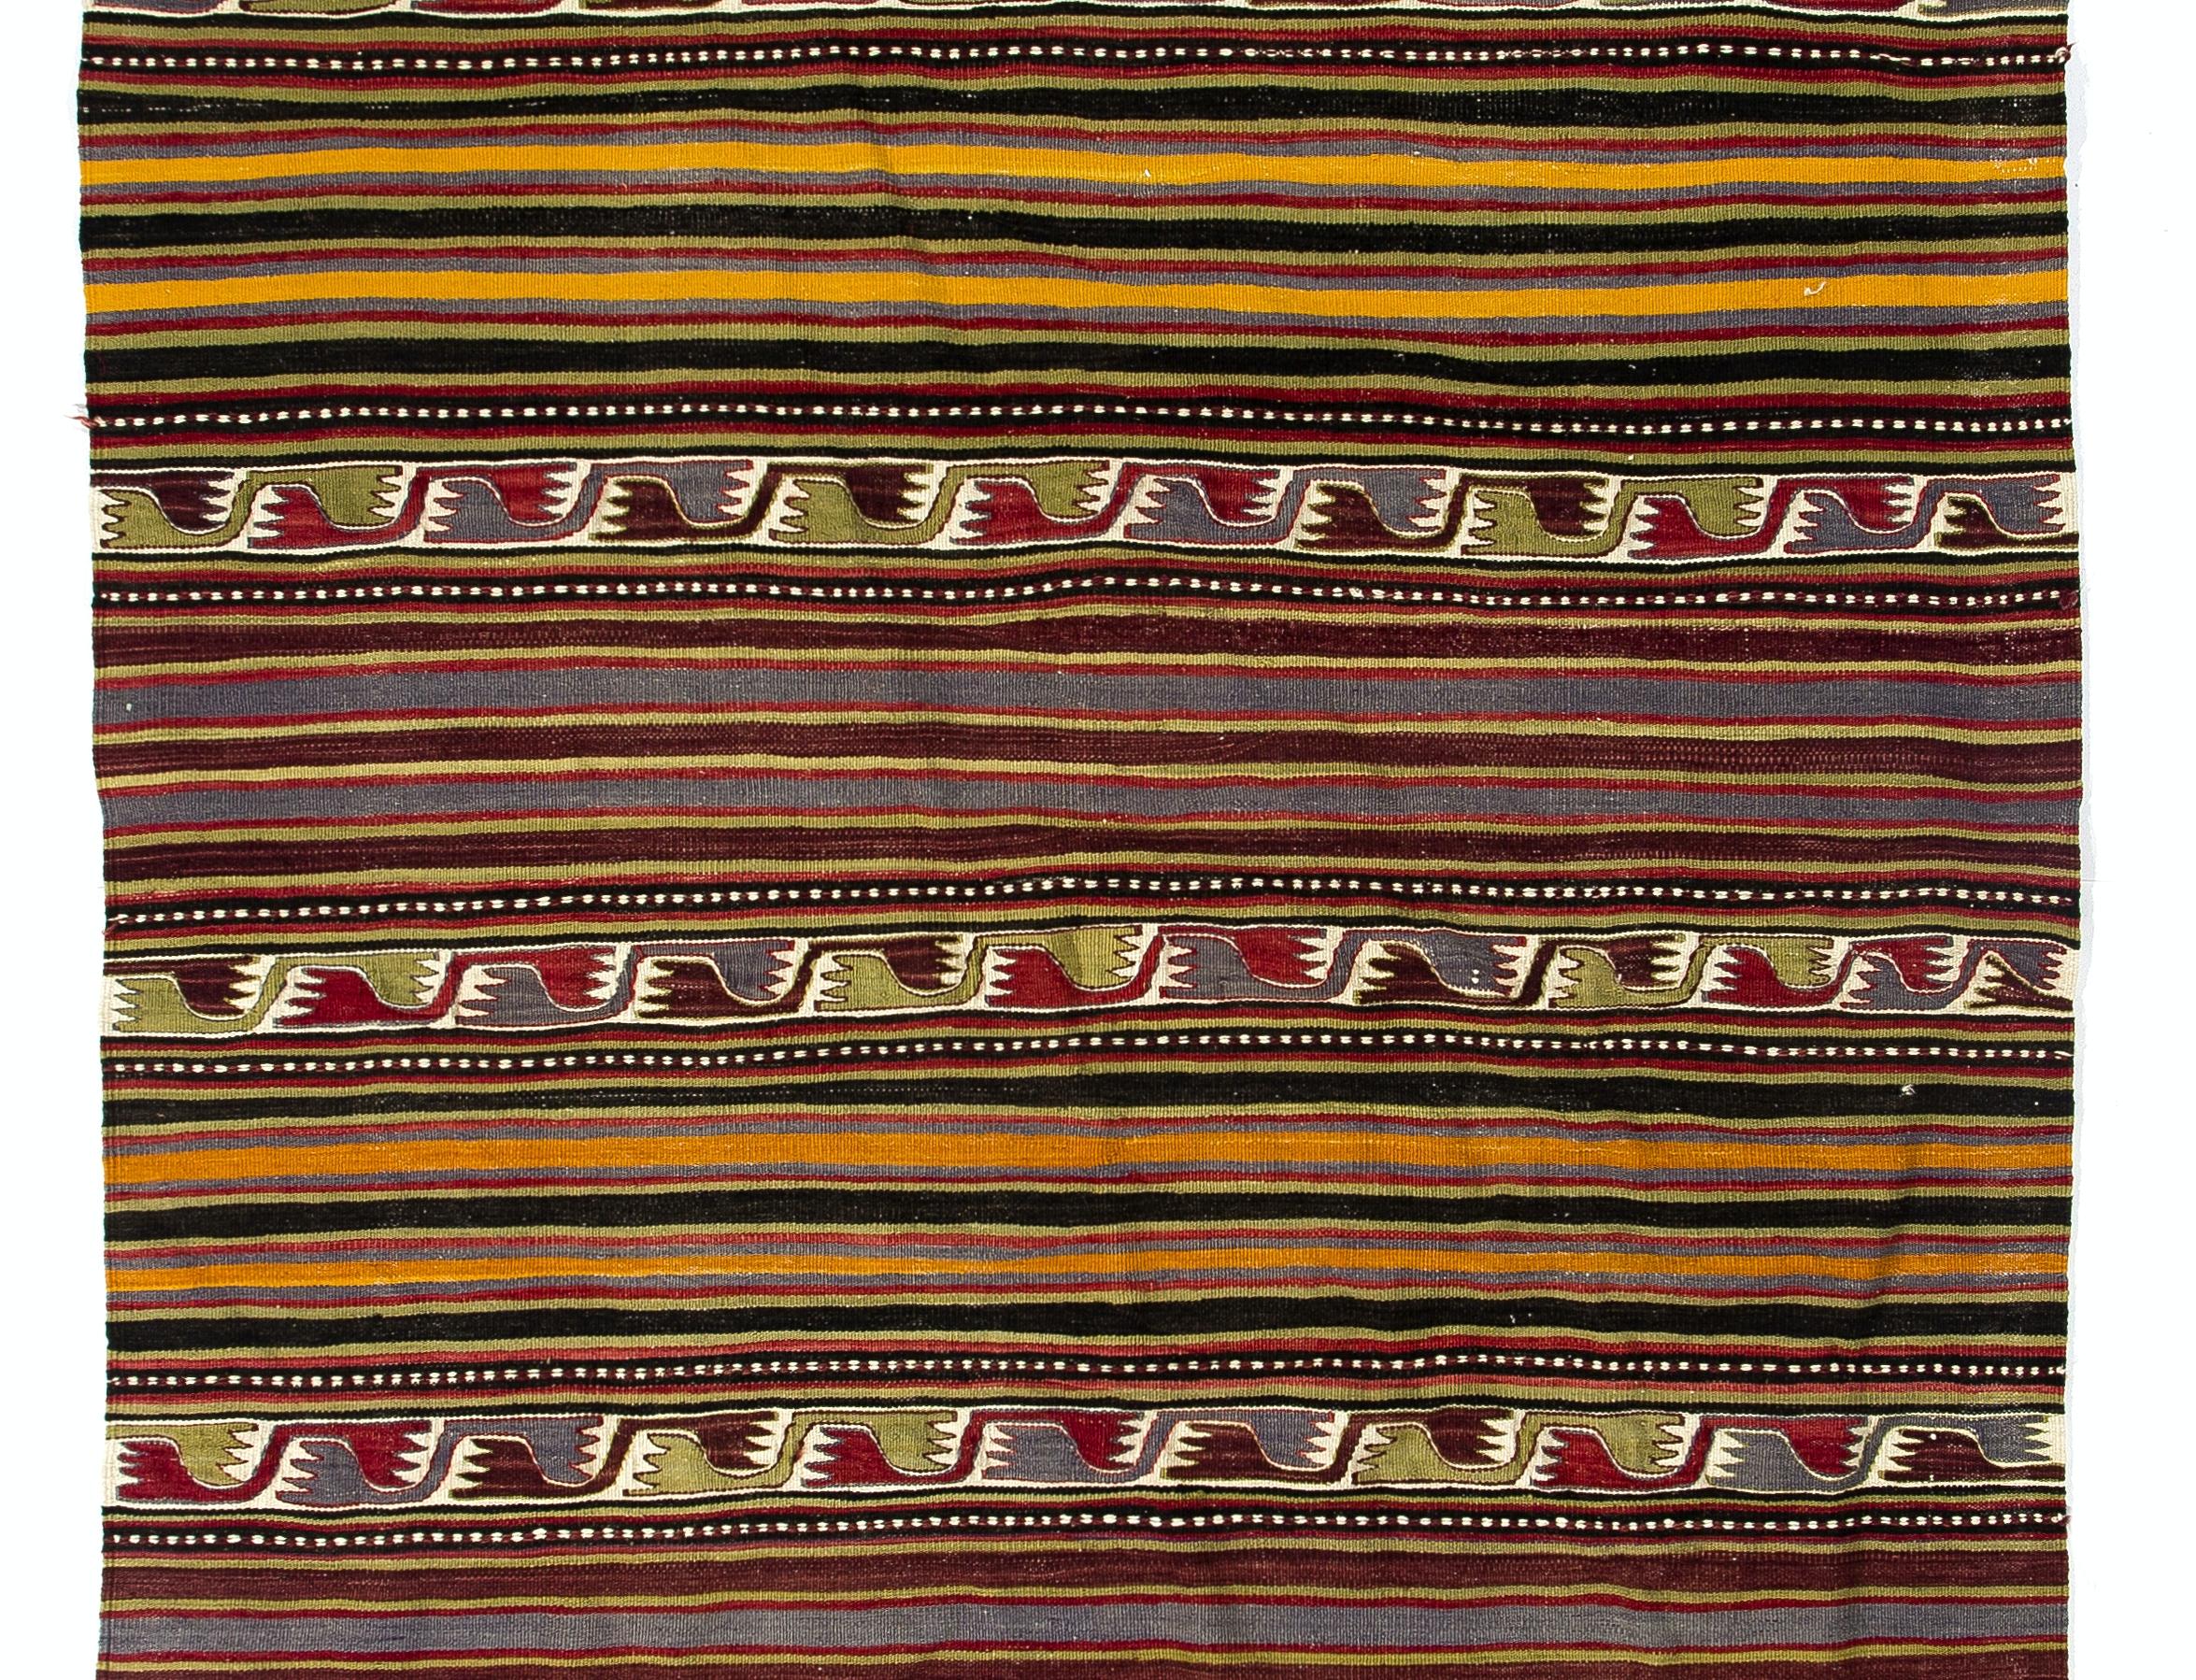 5.2x12.7 Ft Banded Hand-Woven Vintage Turkish Runner Kilim 'FlatWeave', All Wool In Good Condition For Sale In Philadelphia, PA